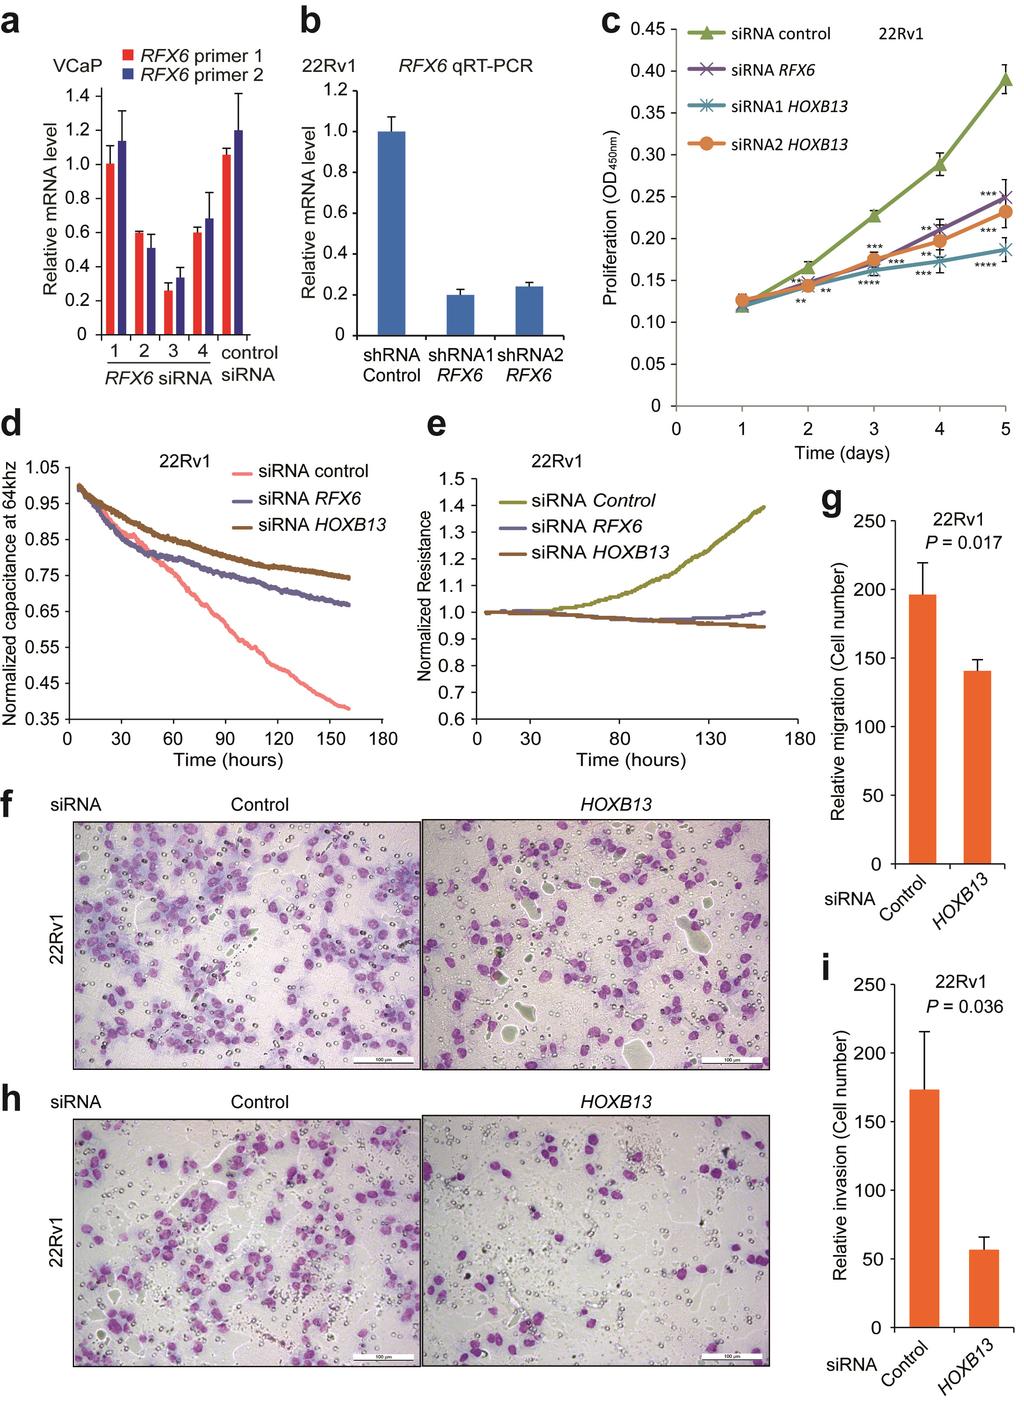 Supplementary Figure 10: The transcription factor gene RFX6 and HOXB13 influence cellular phenotypes related to tumor-associated properties in prostate cancer cells.